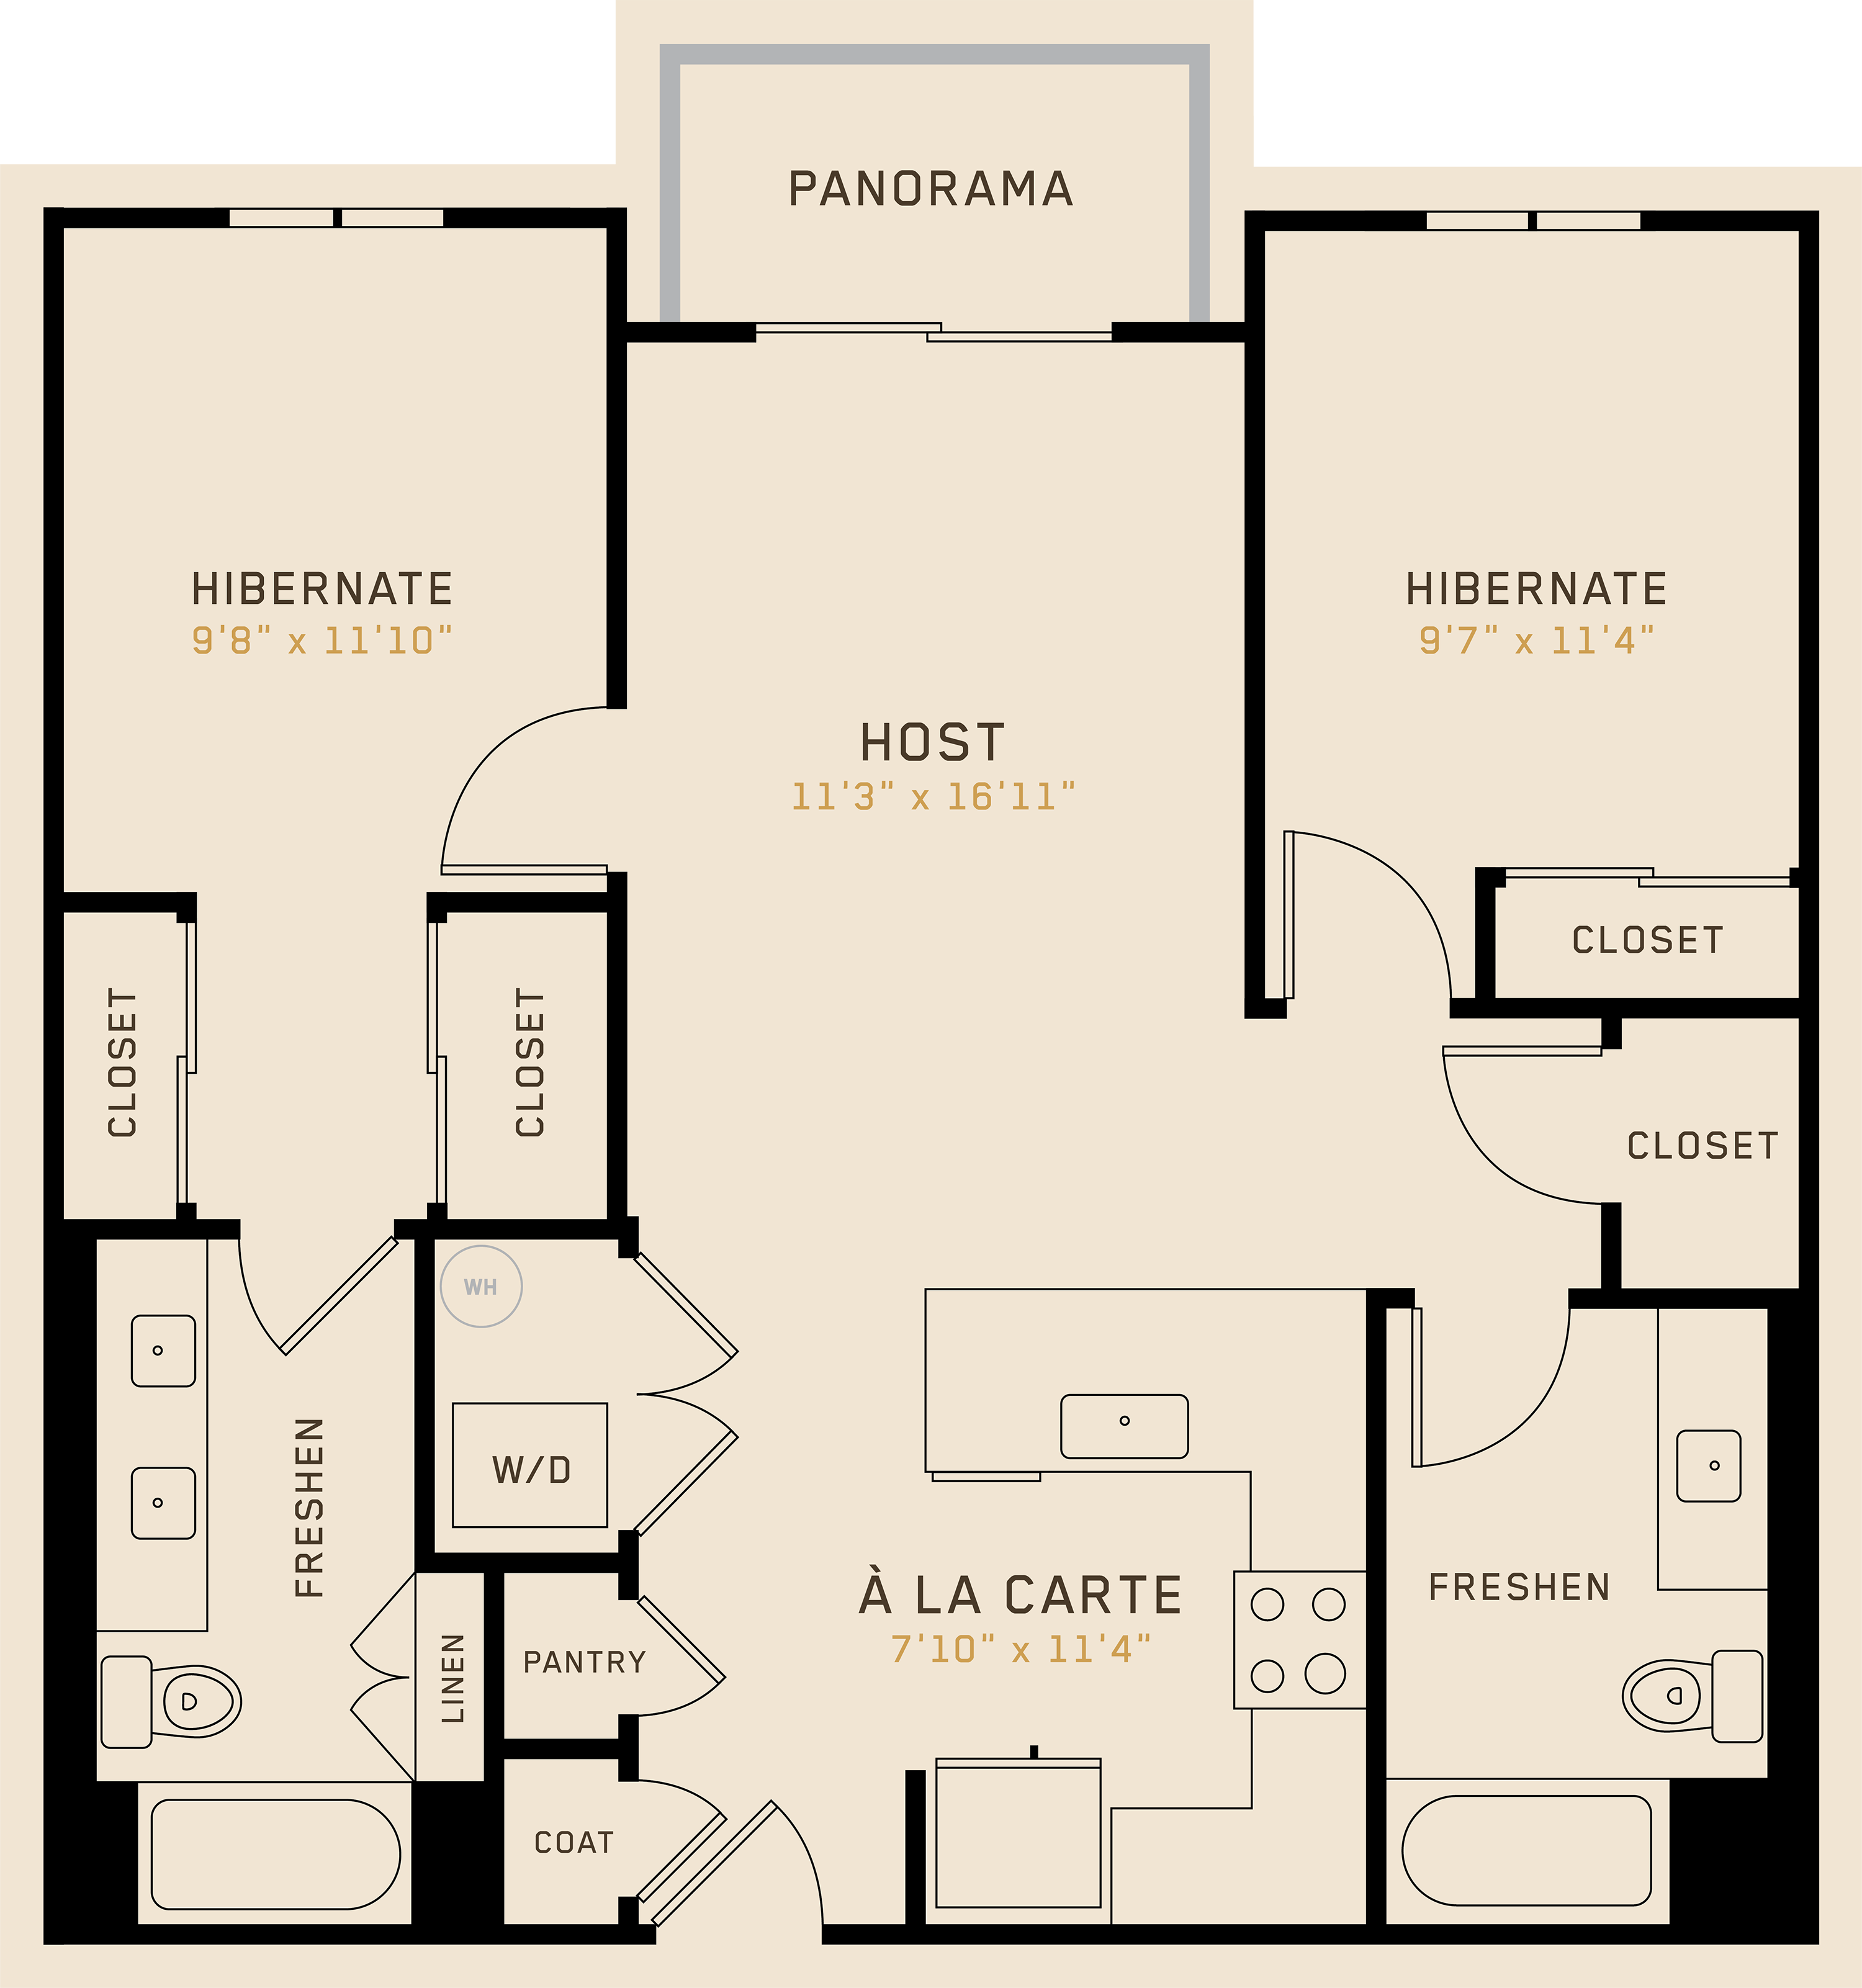 B2G floor plan featuring 2 bedrooms, 2 bathrooms, and is 988 square feet